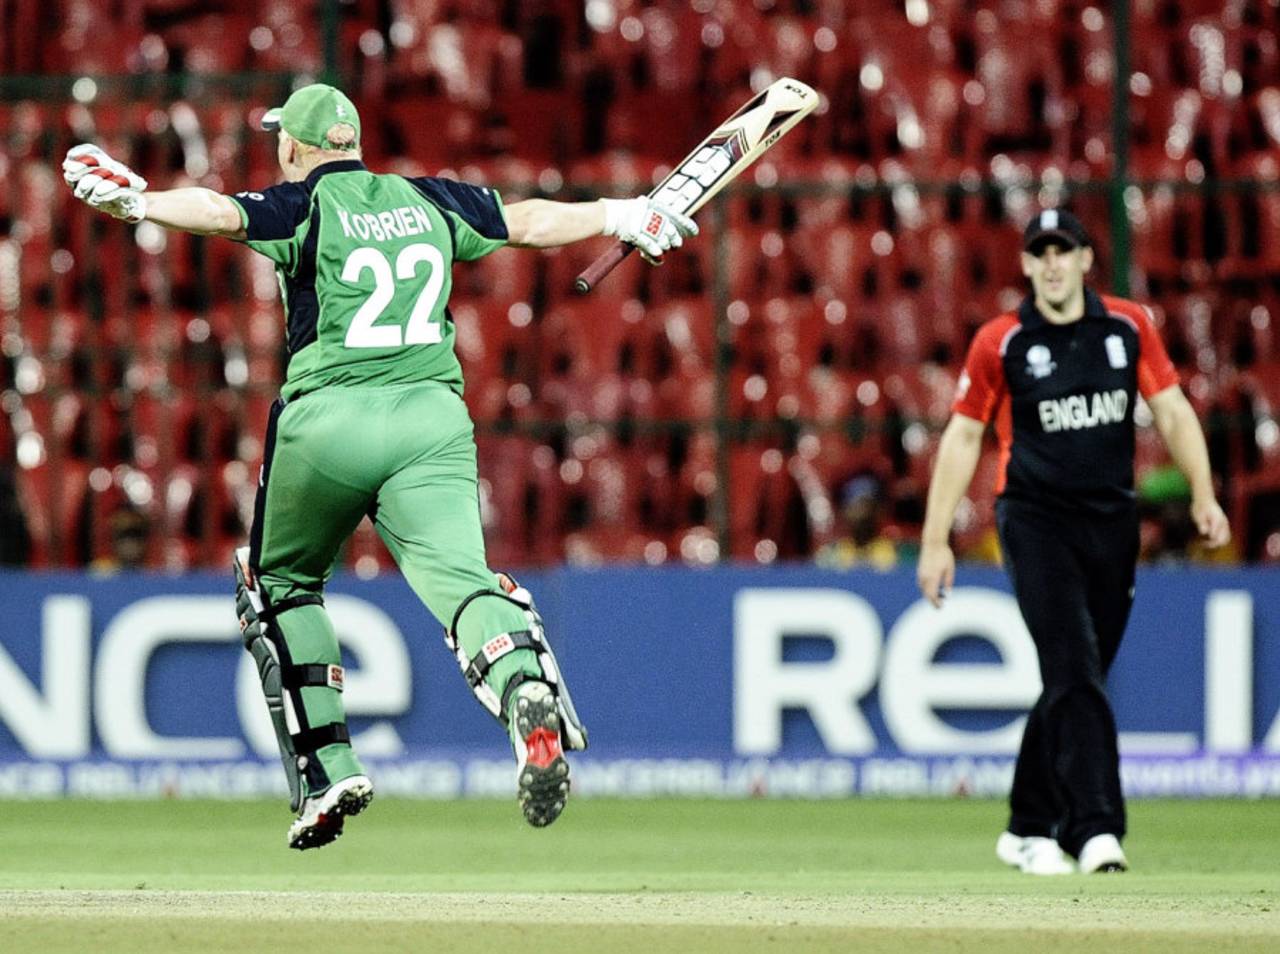 Kevin O'Brien roars with triumph after bringing up his 50-ball century, England v Ireland, World Cup 2011, Bangalore, March 2, 2011